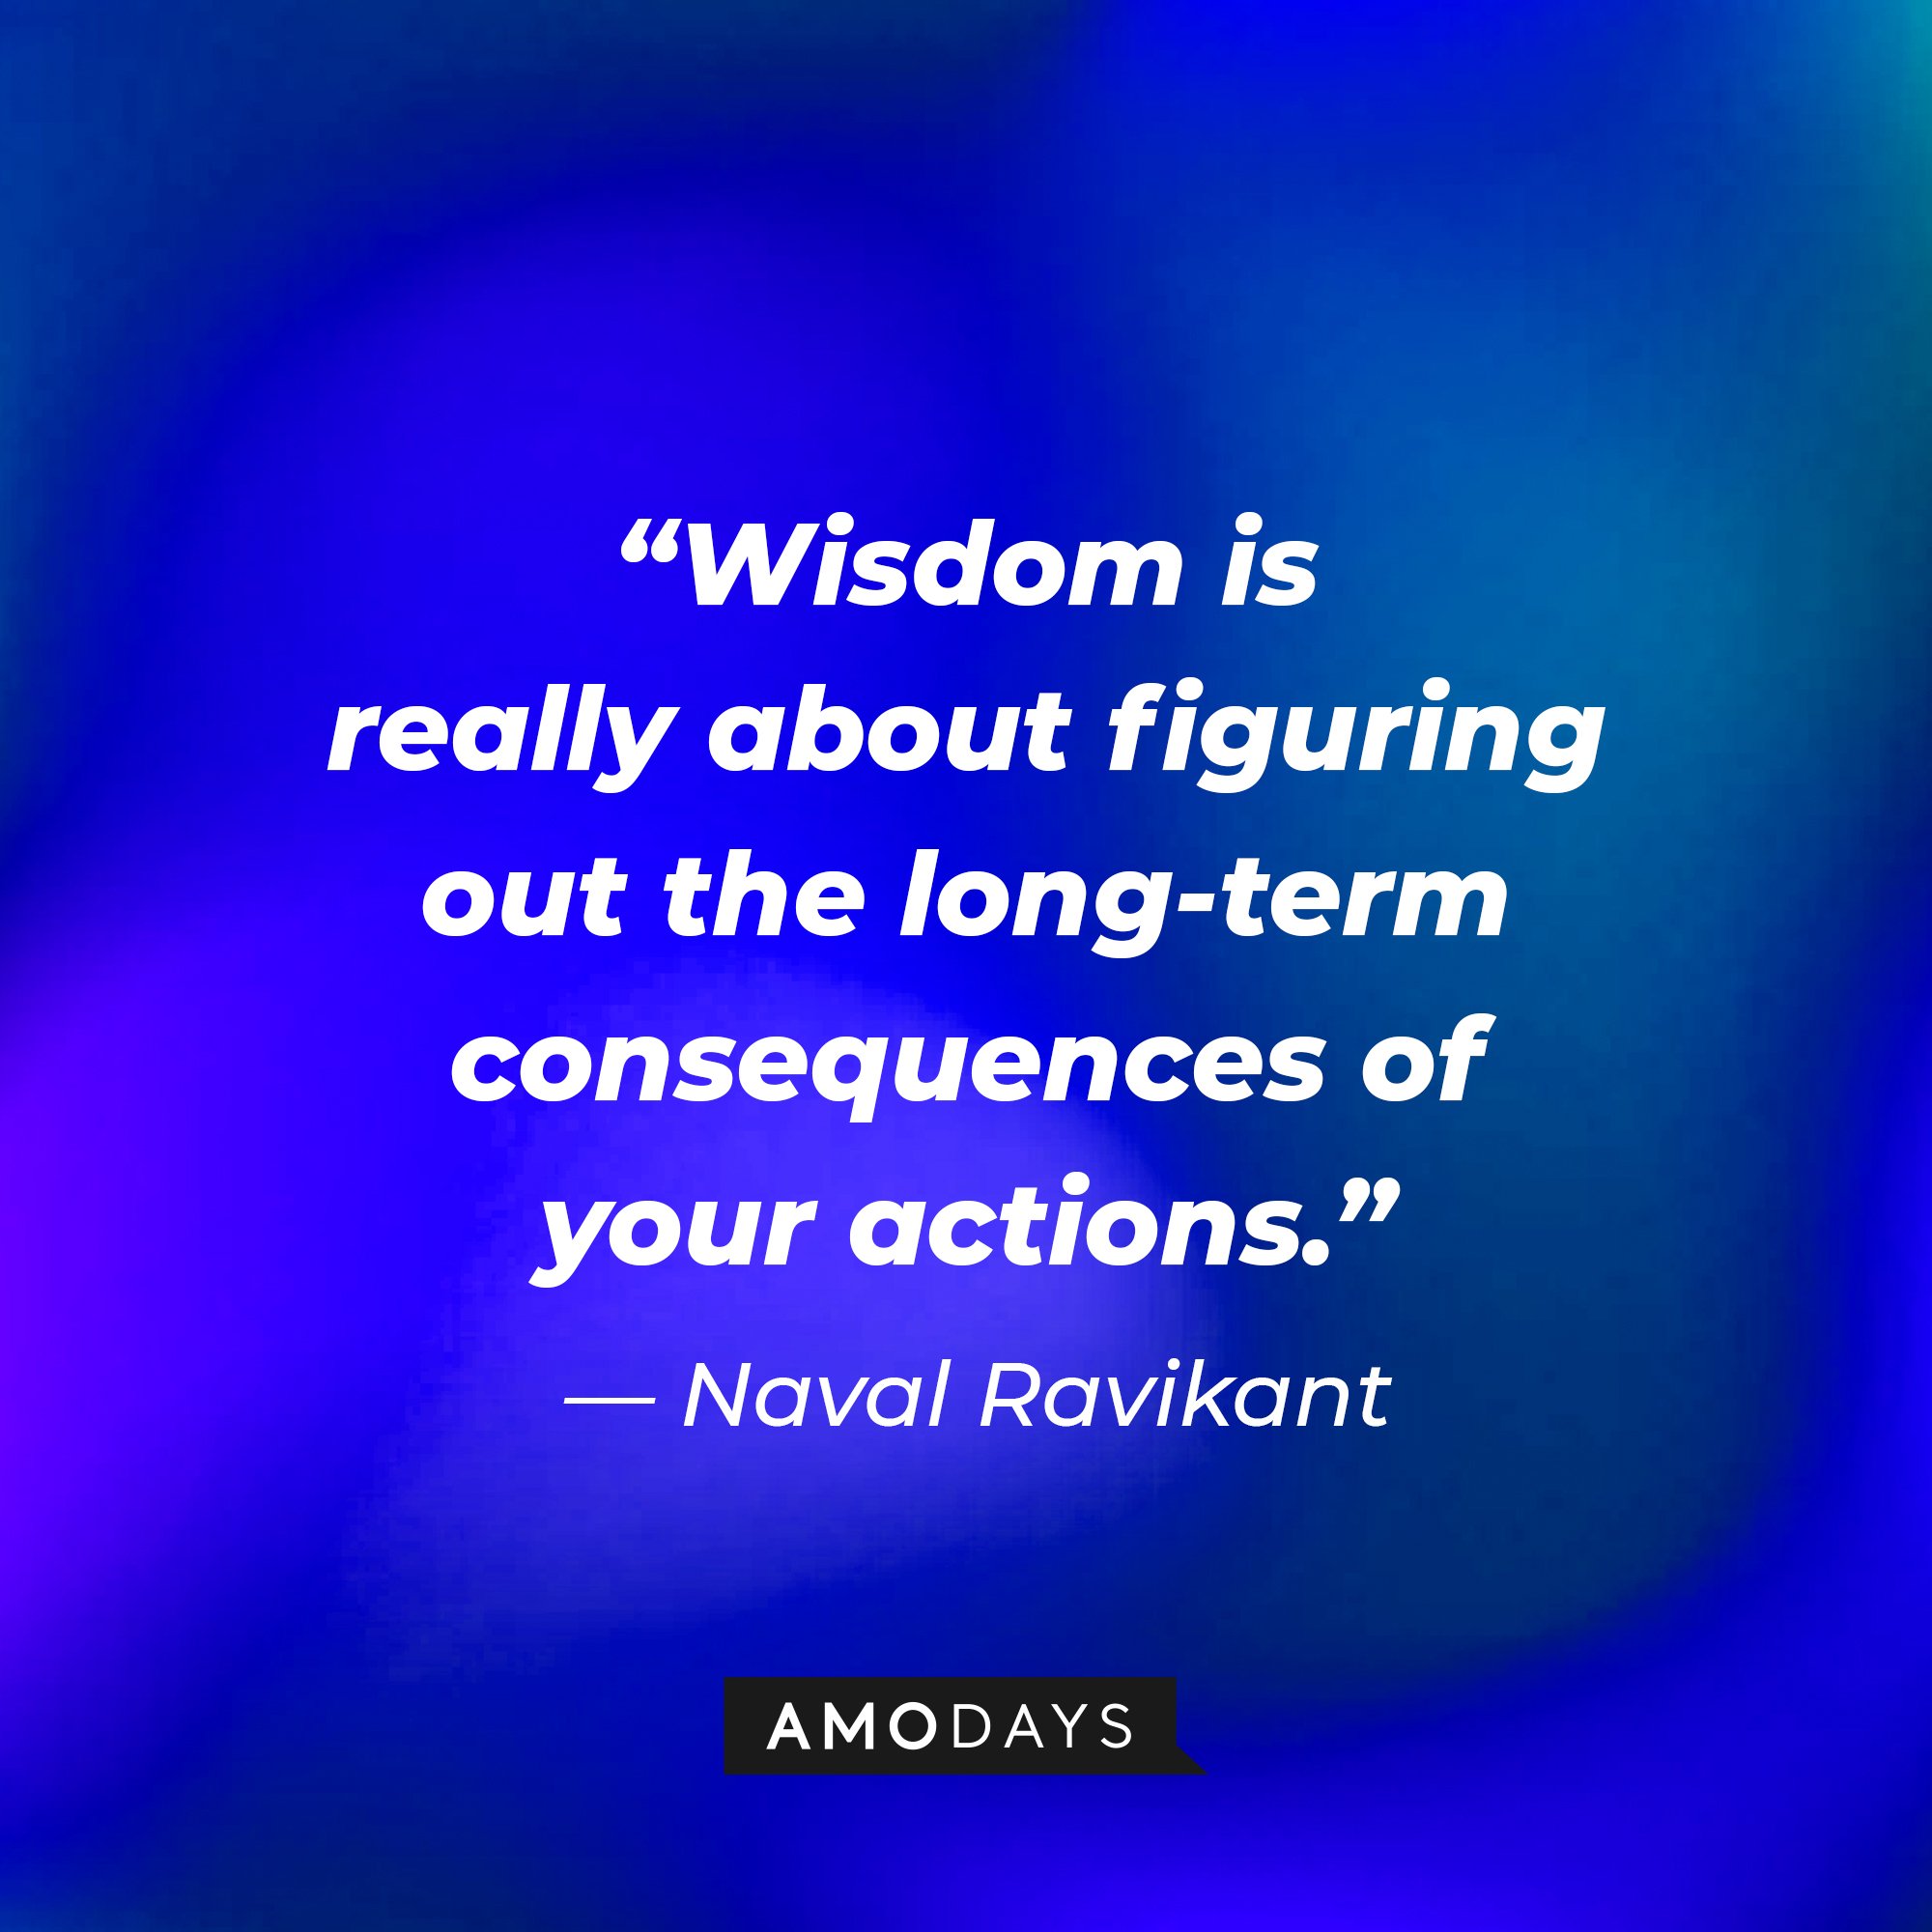 Naval Ravikant's quote: “Wisdom is really about figuring out the long-term consequences of your actions.” | Image: AmoDays